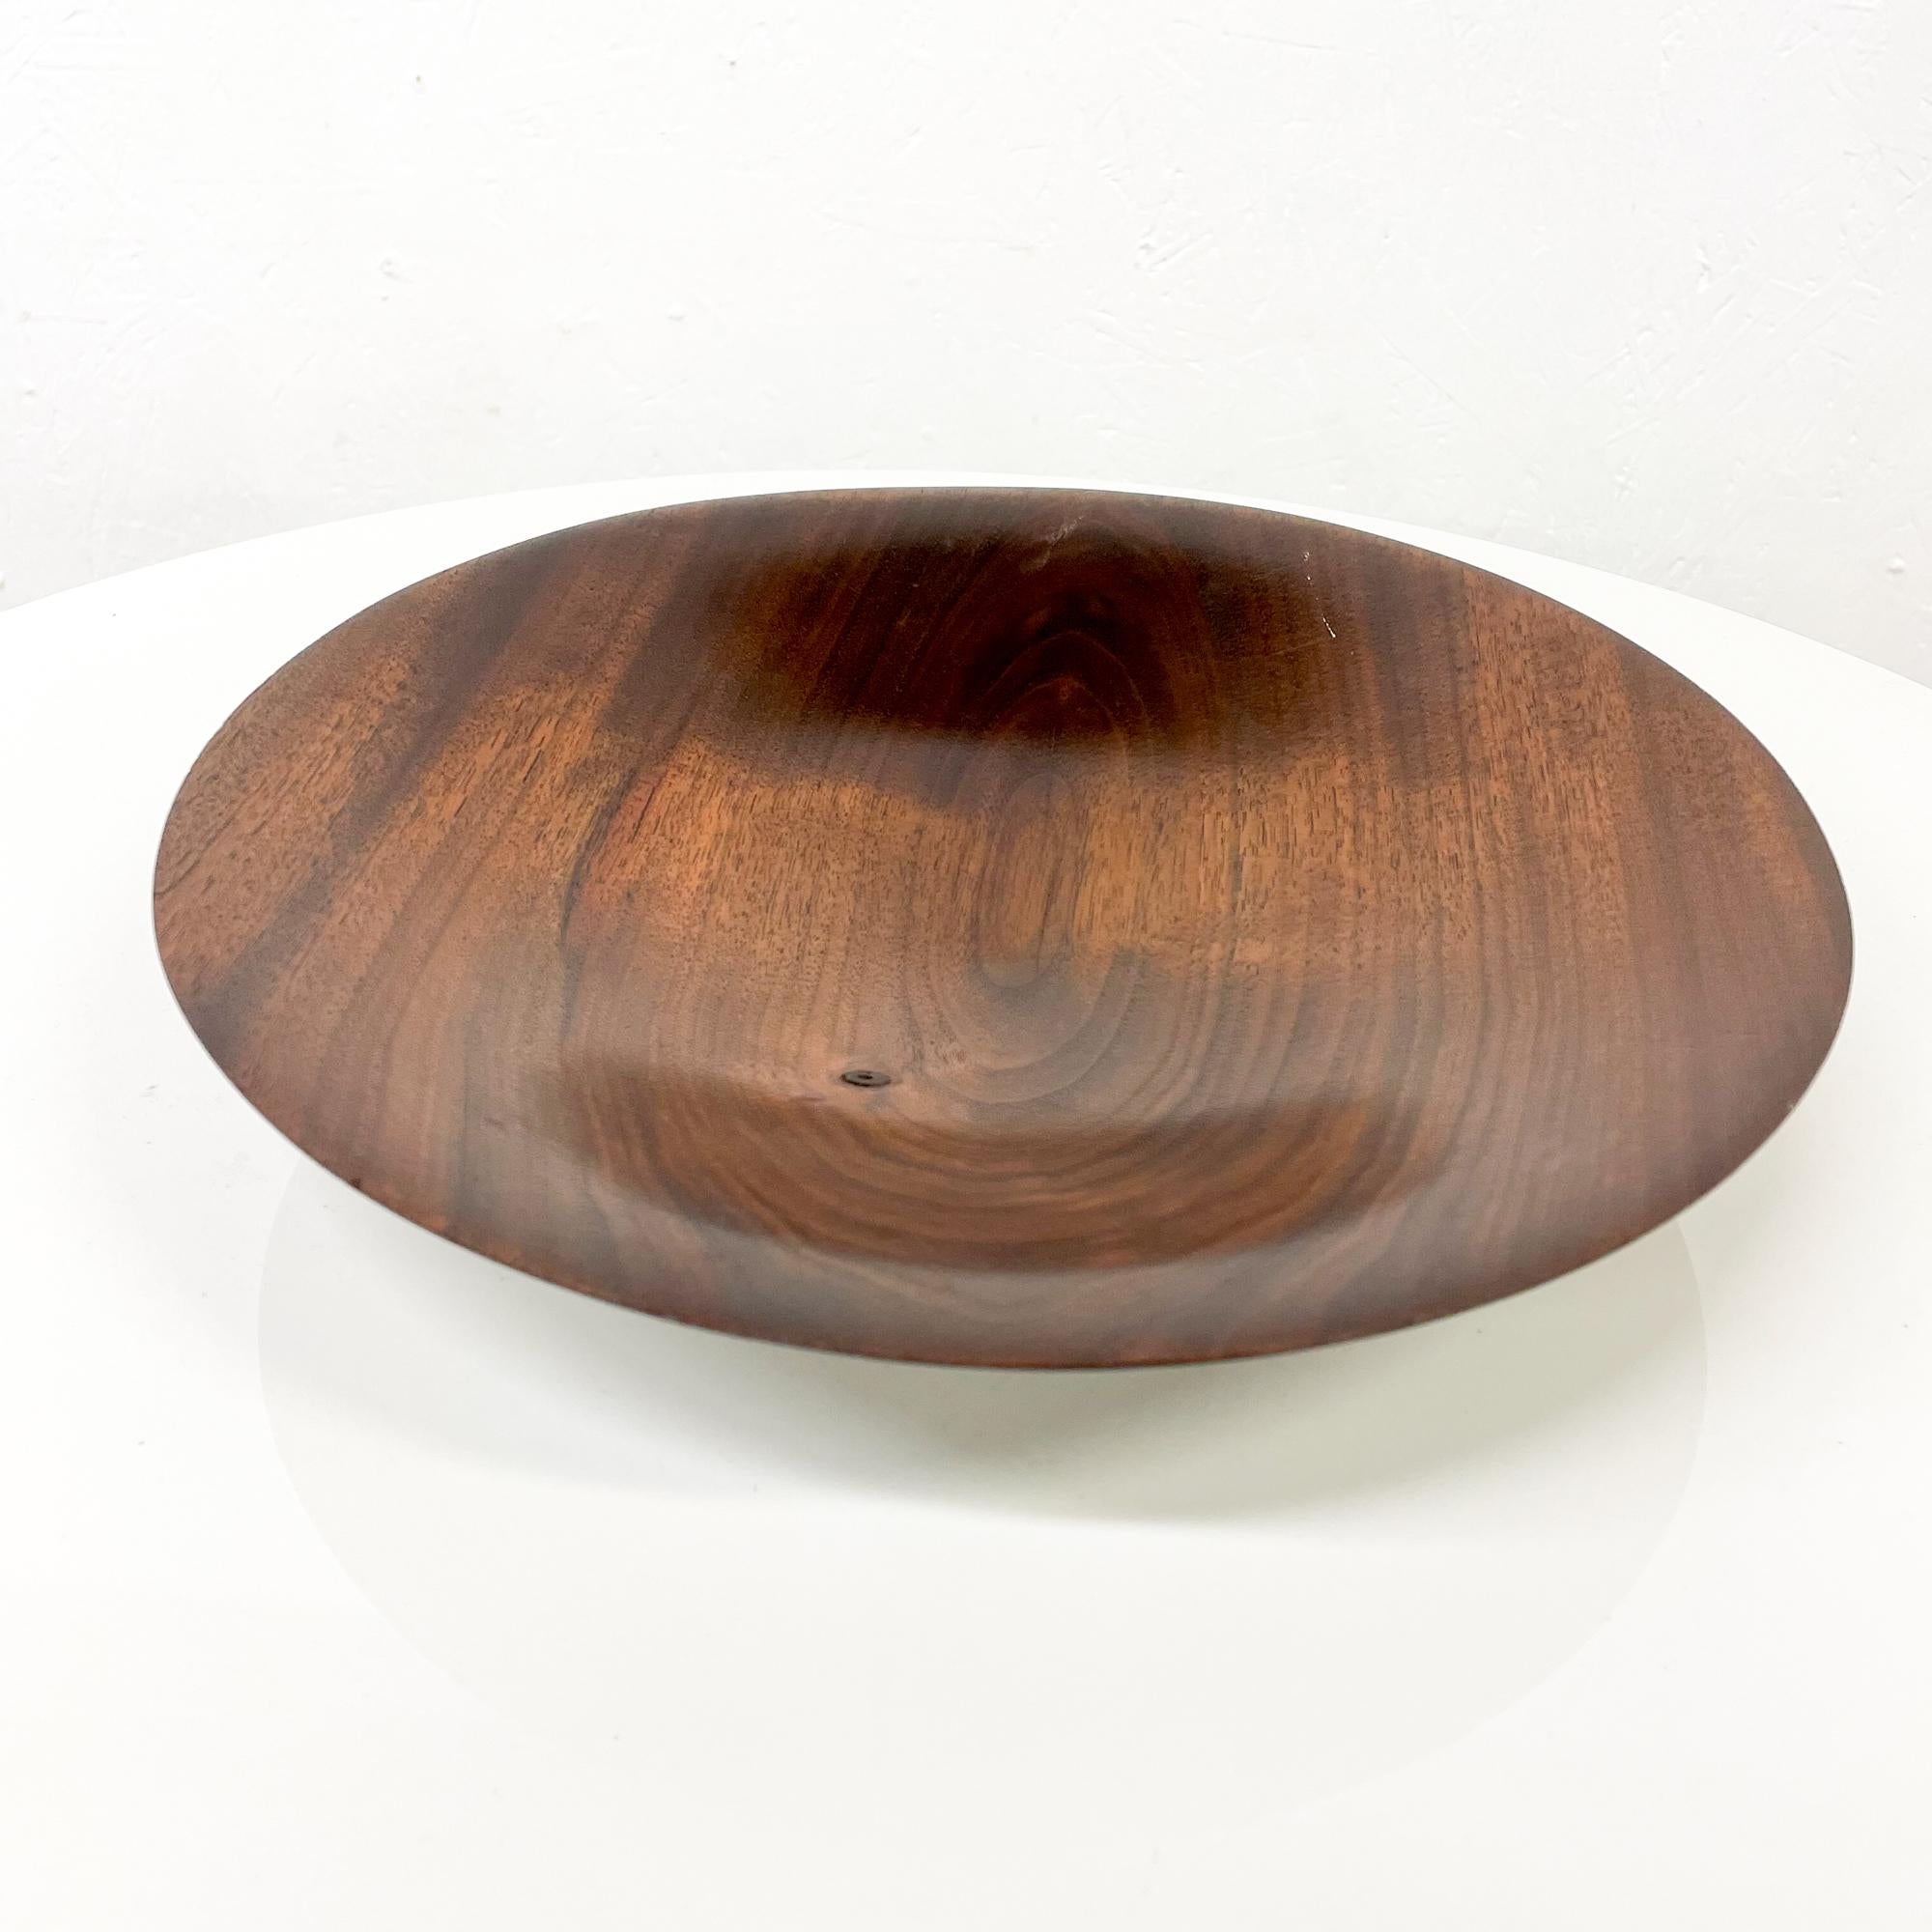 Art Plate
midcentury modern decorative art plate in solid walnut wood.
Signed underneath with artist's signature. Unable to read the name. 
Made in the USA, circa the 1960s.
Nakashima era.
Very good original unrestored condition.
Refer to images.